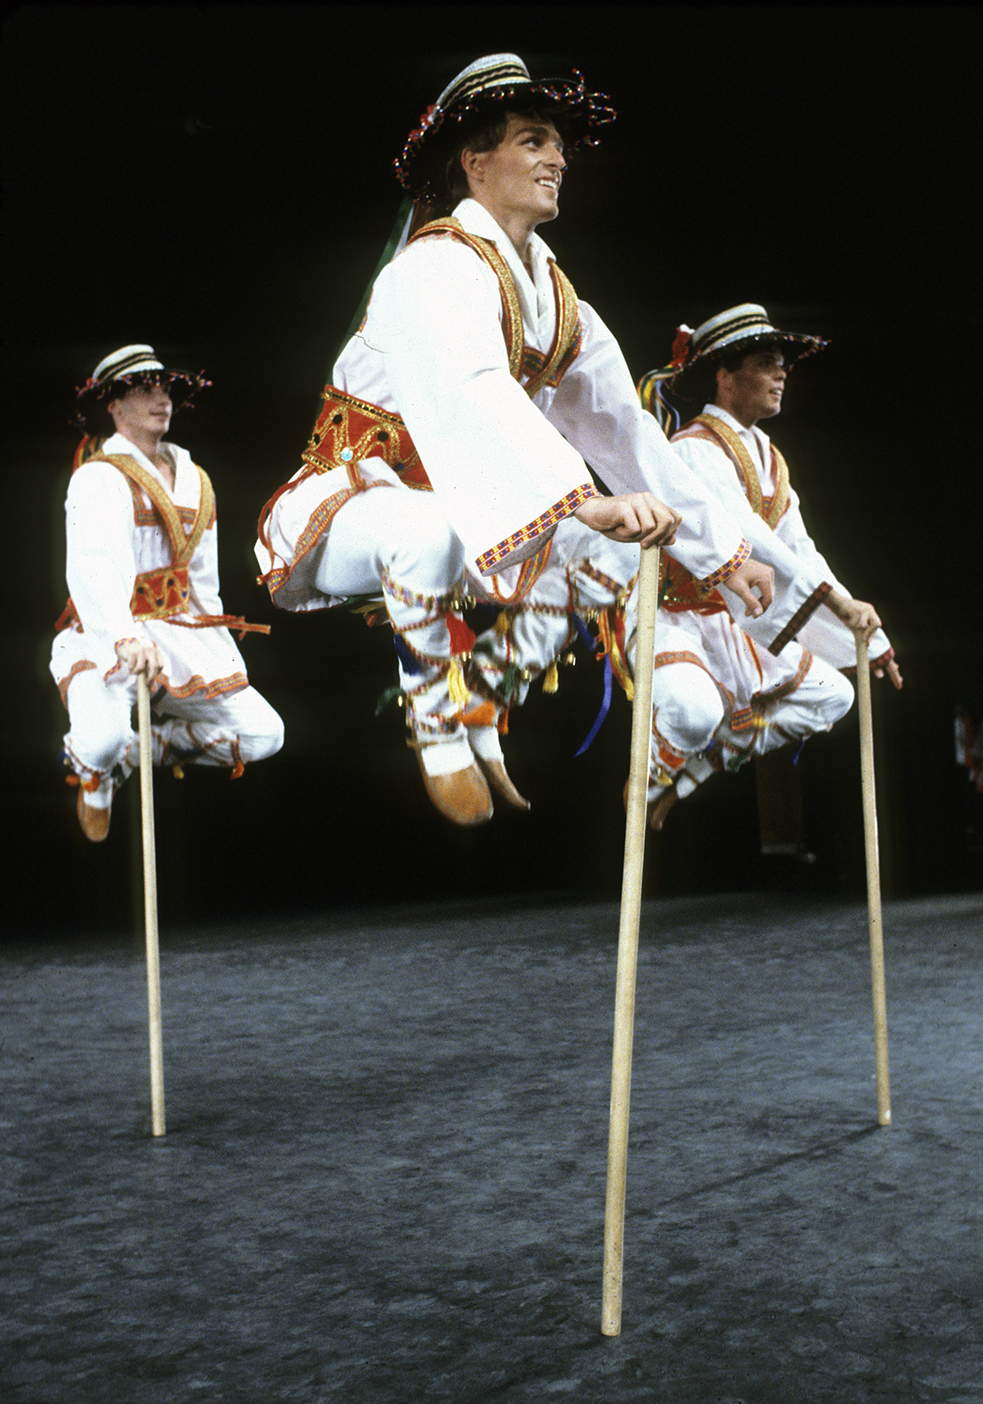 Three male folk dancers wearing traditional costumes jump high into the air during a dance on stage